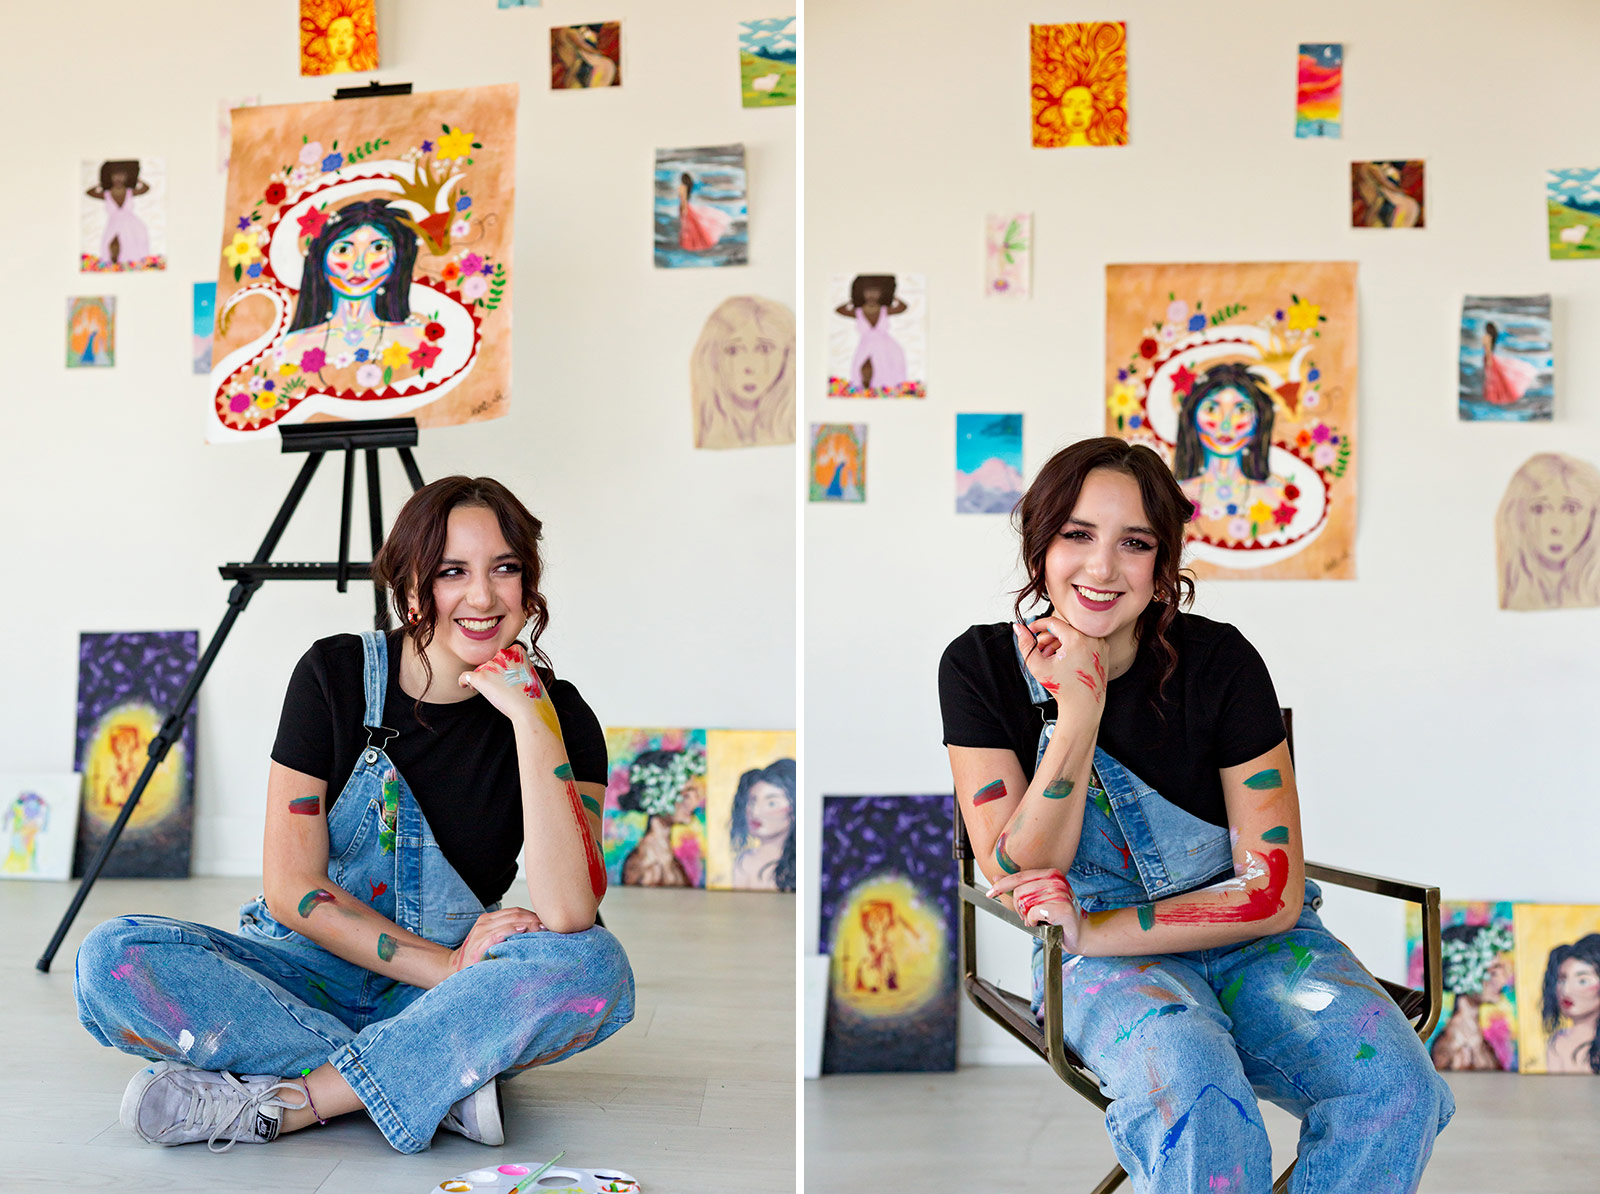 Isabella proudly displays her paintings in a studio.